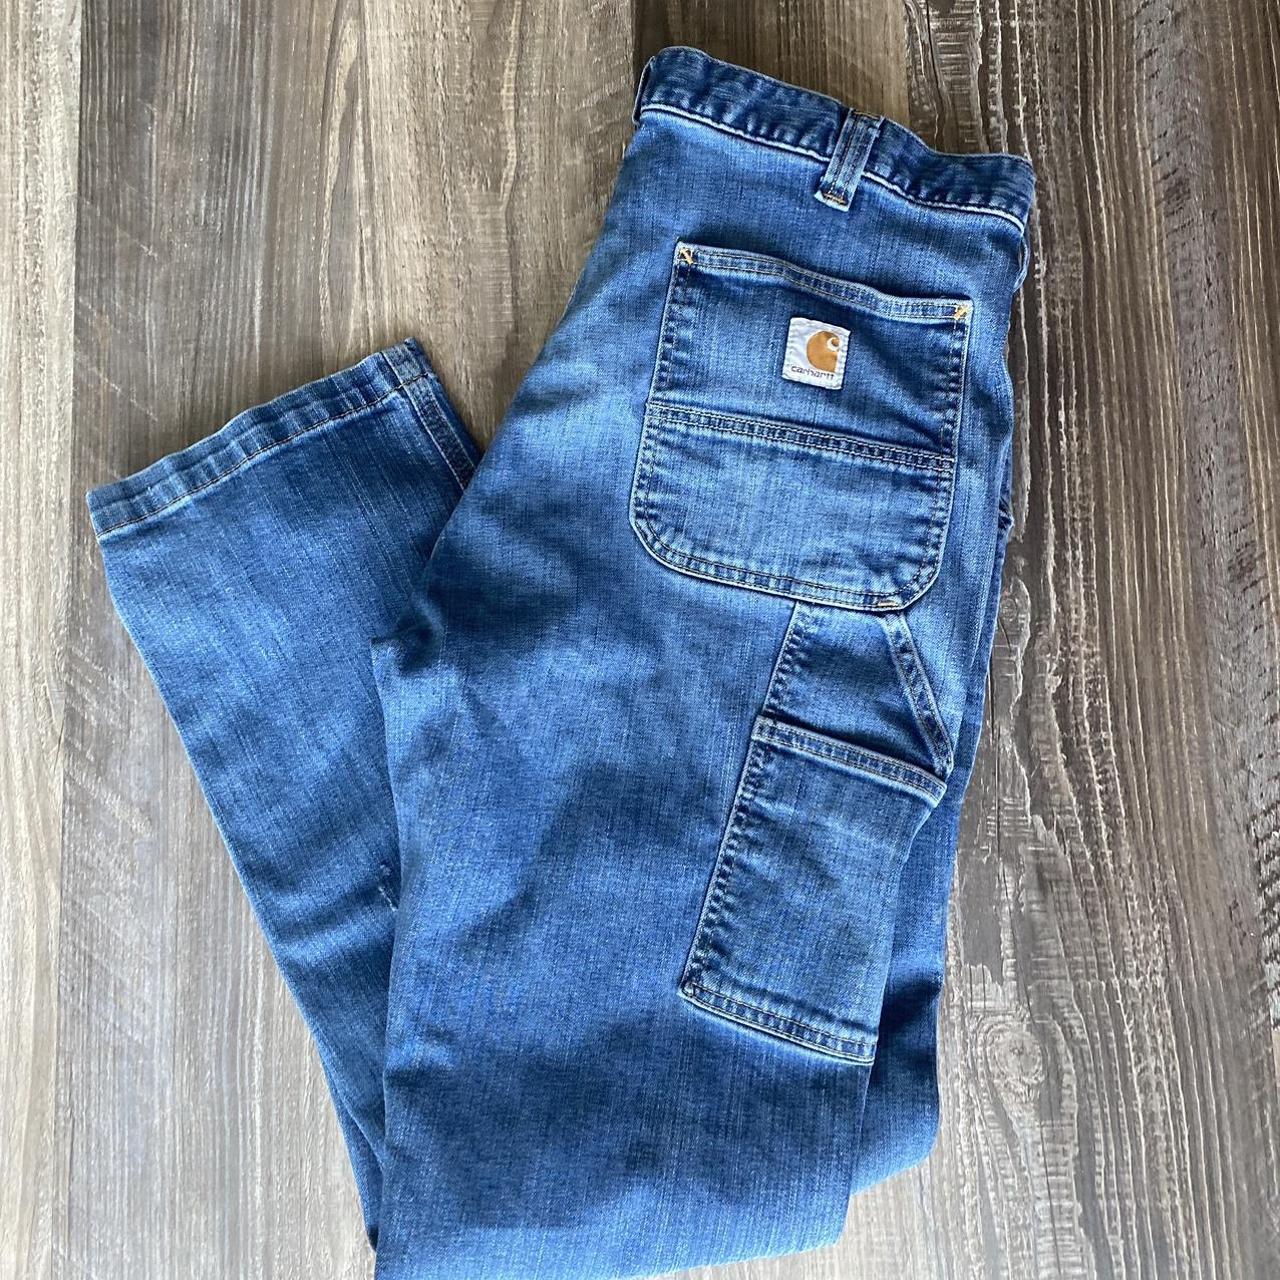 Painted and Dirty Carhartt Denim Jeans - Size 36 x... - Depop